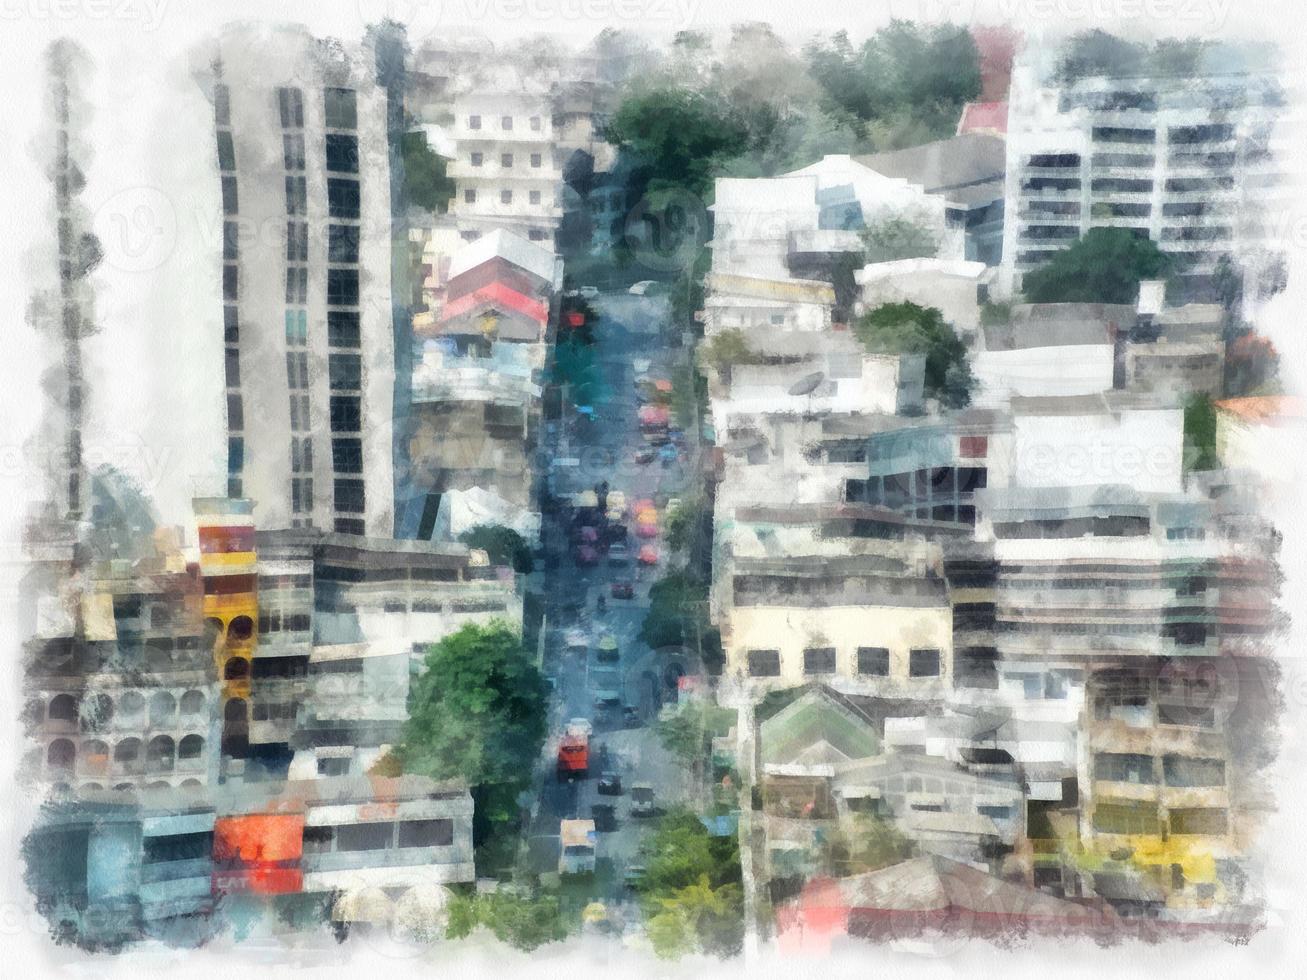 The landscape of buildings and houses and roads in Bangkok watercolor style illustration impressionist painting. photo